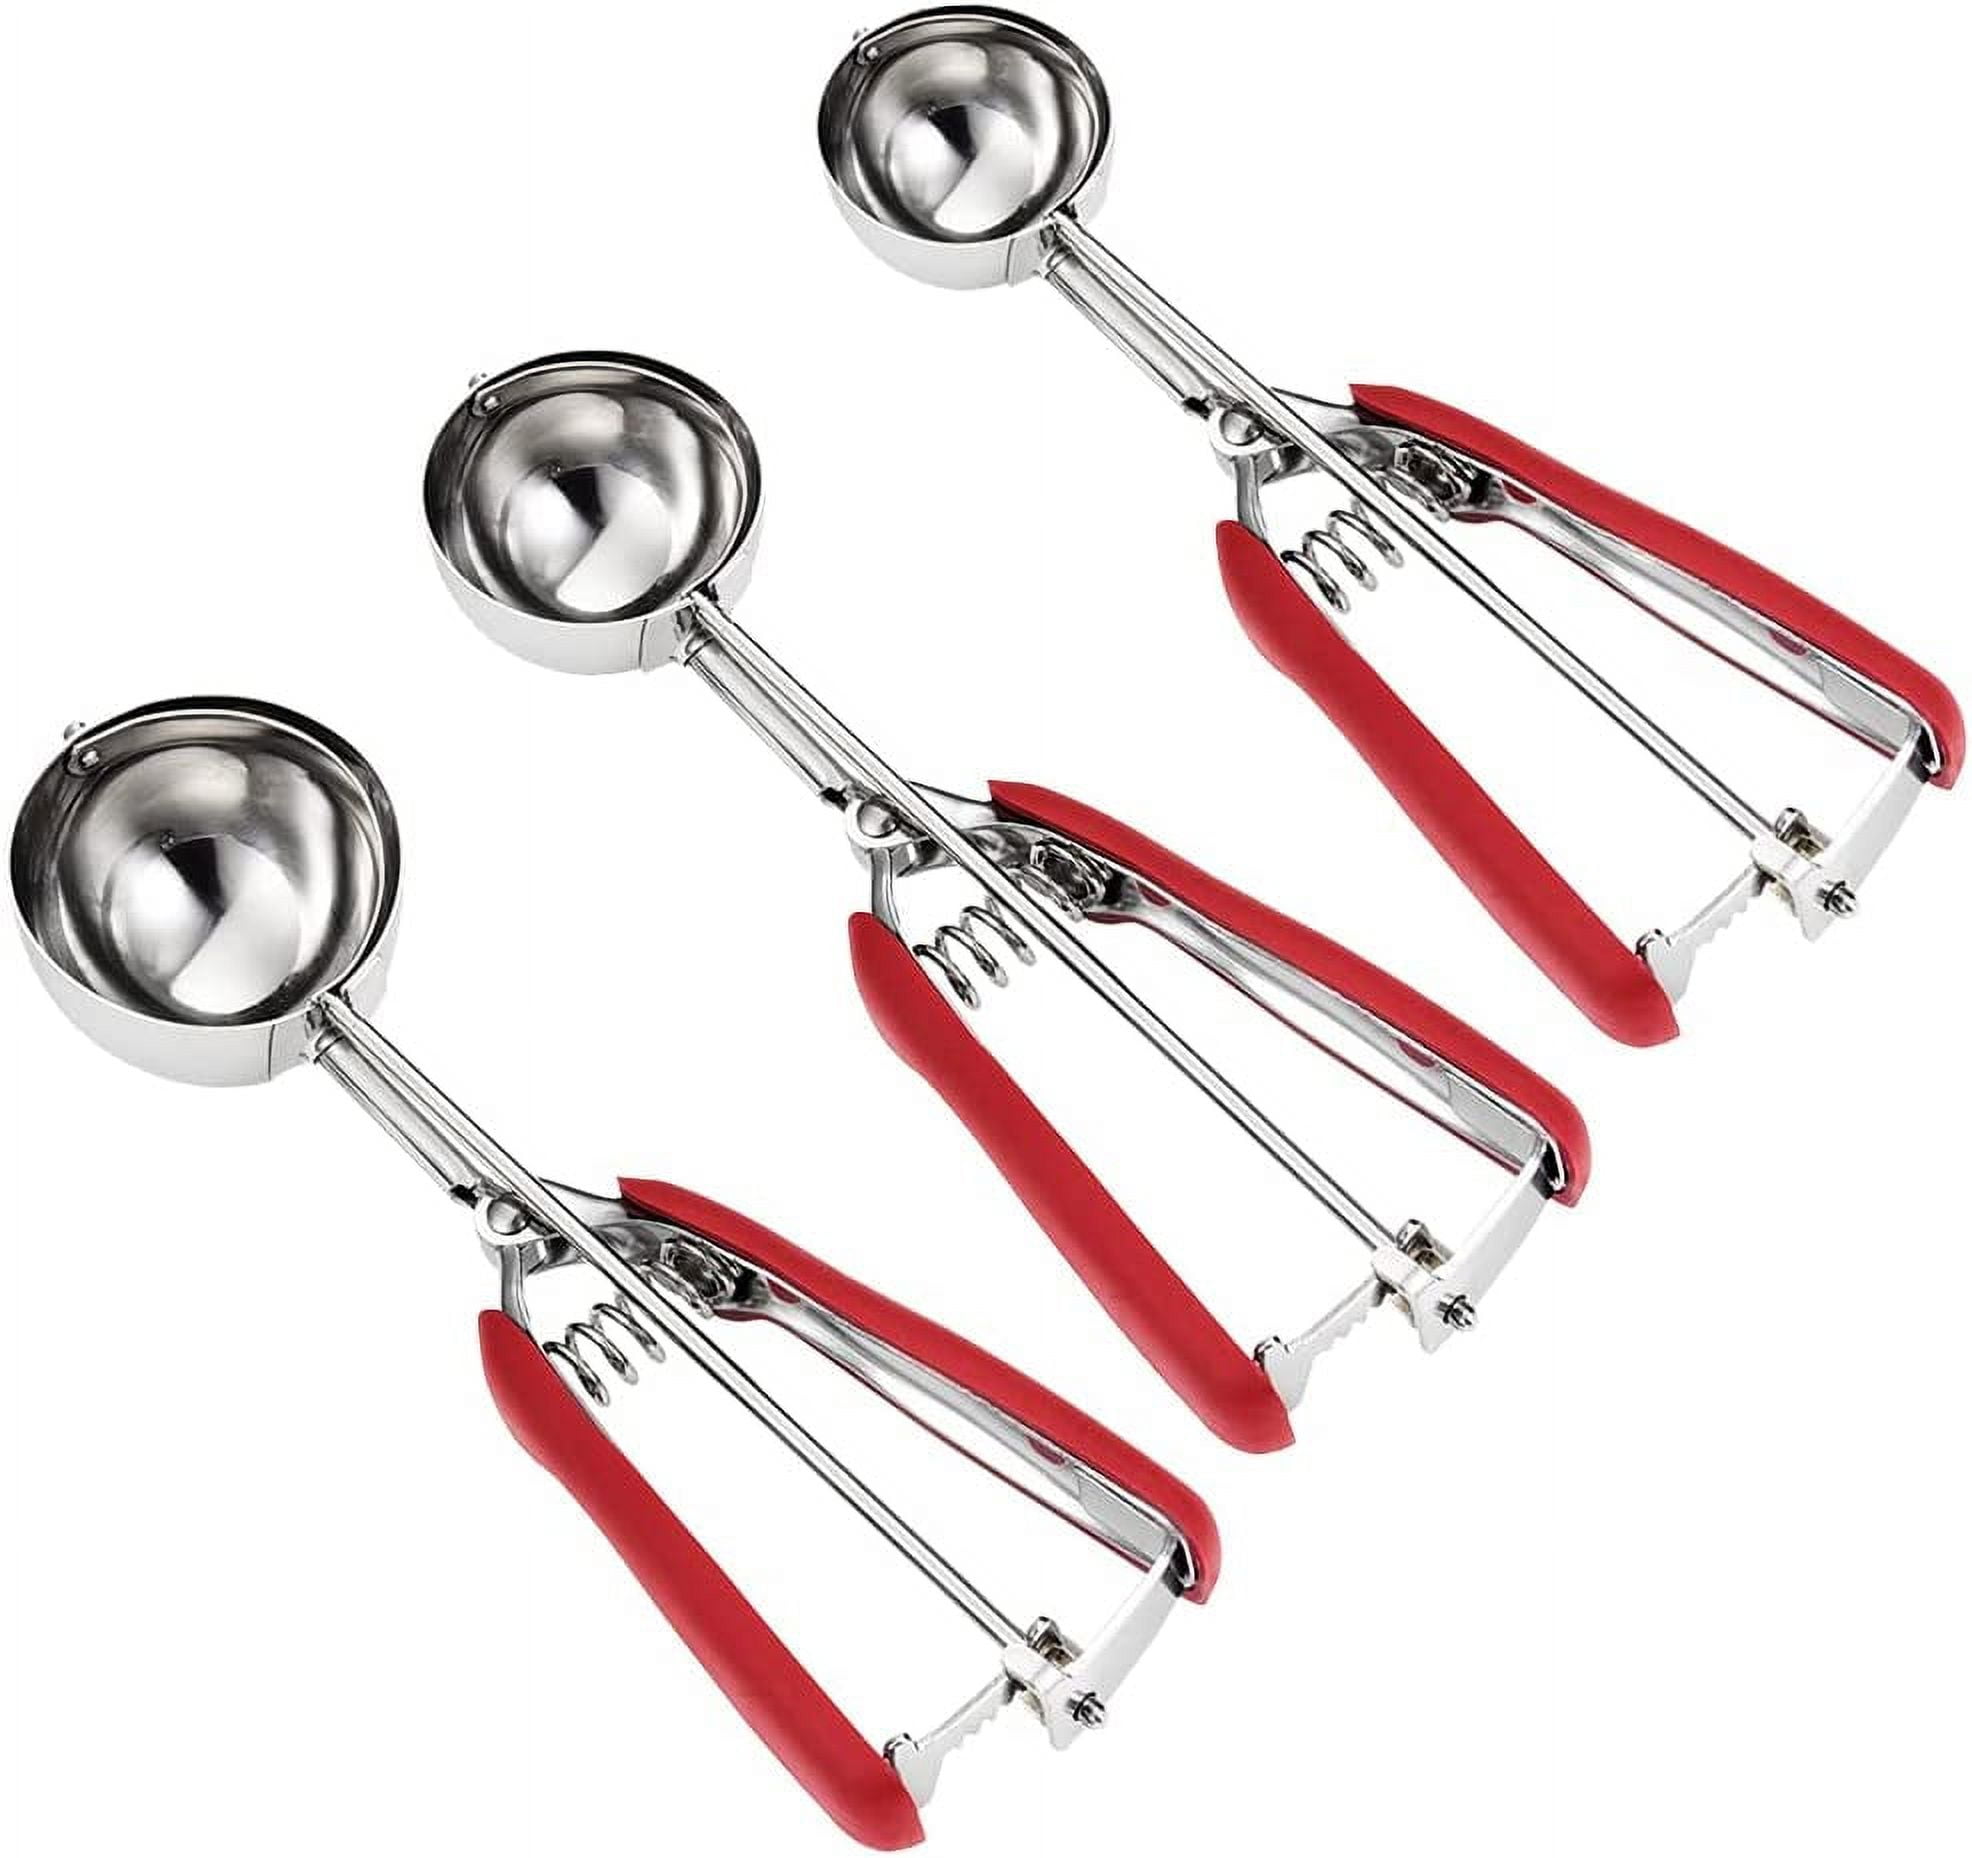 Cookie Scoop set, Size #60\\/ #40\\/ #20 Size Cookie Dough Scoop, 3 Pack Cookie  Scoops for Baking, Non-slik Grip, Red, 18\\/8 Stainless Steel 